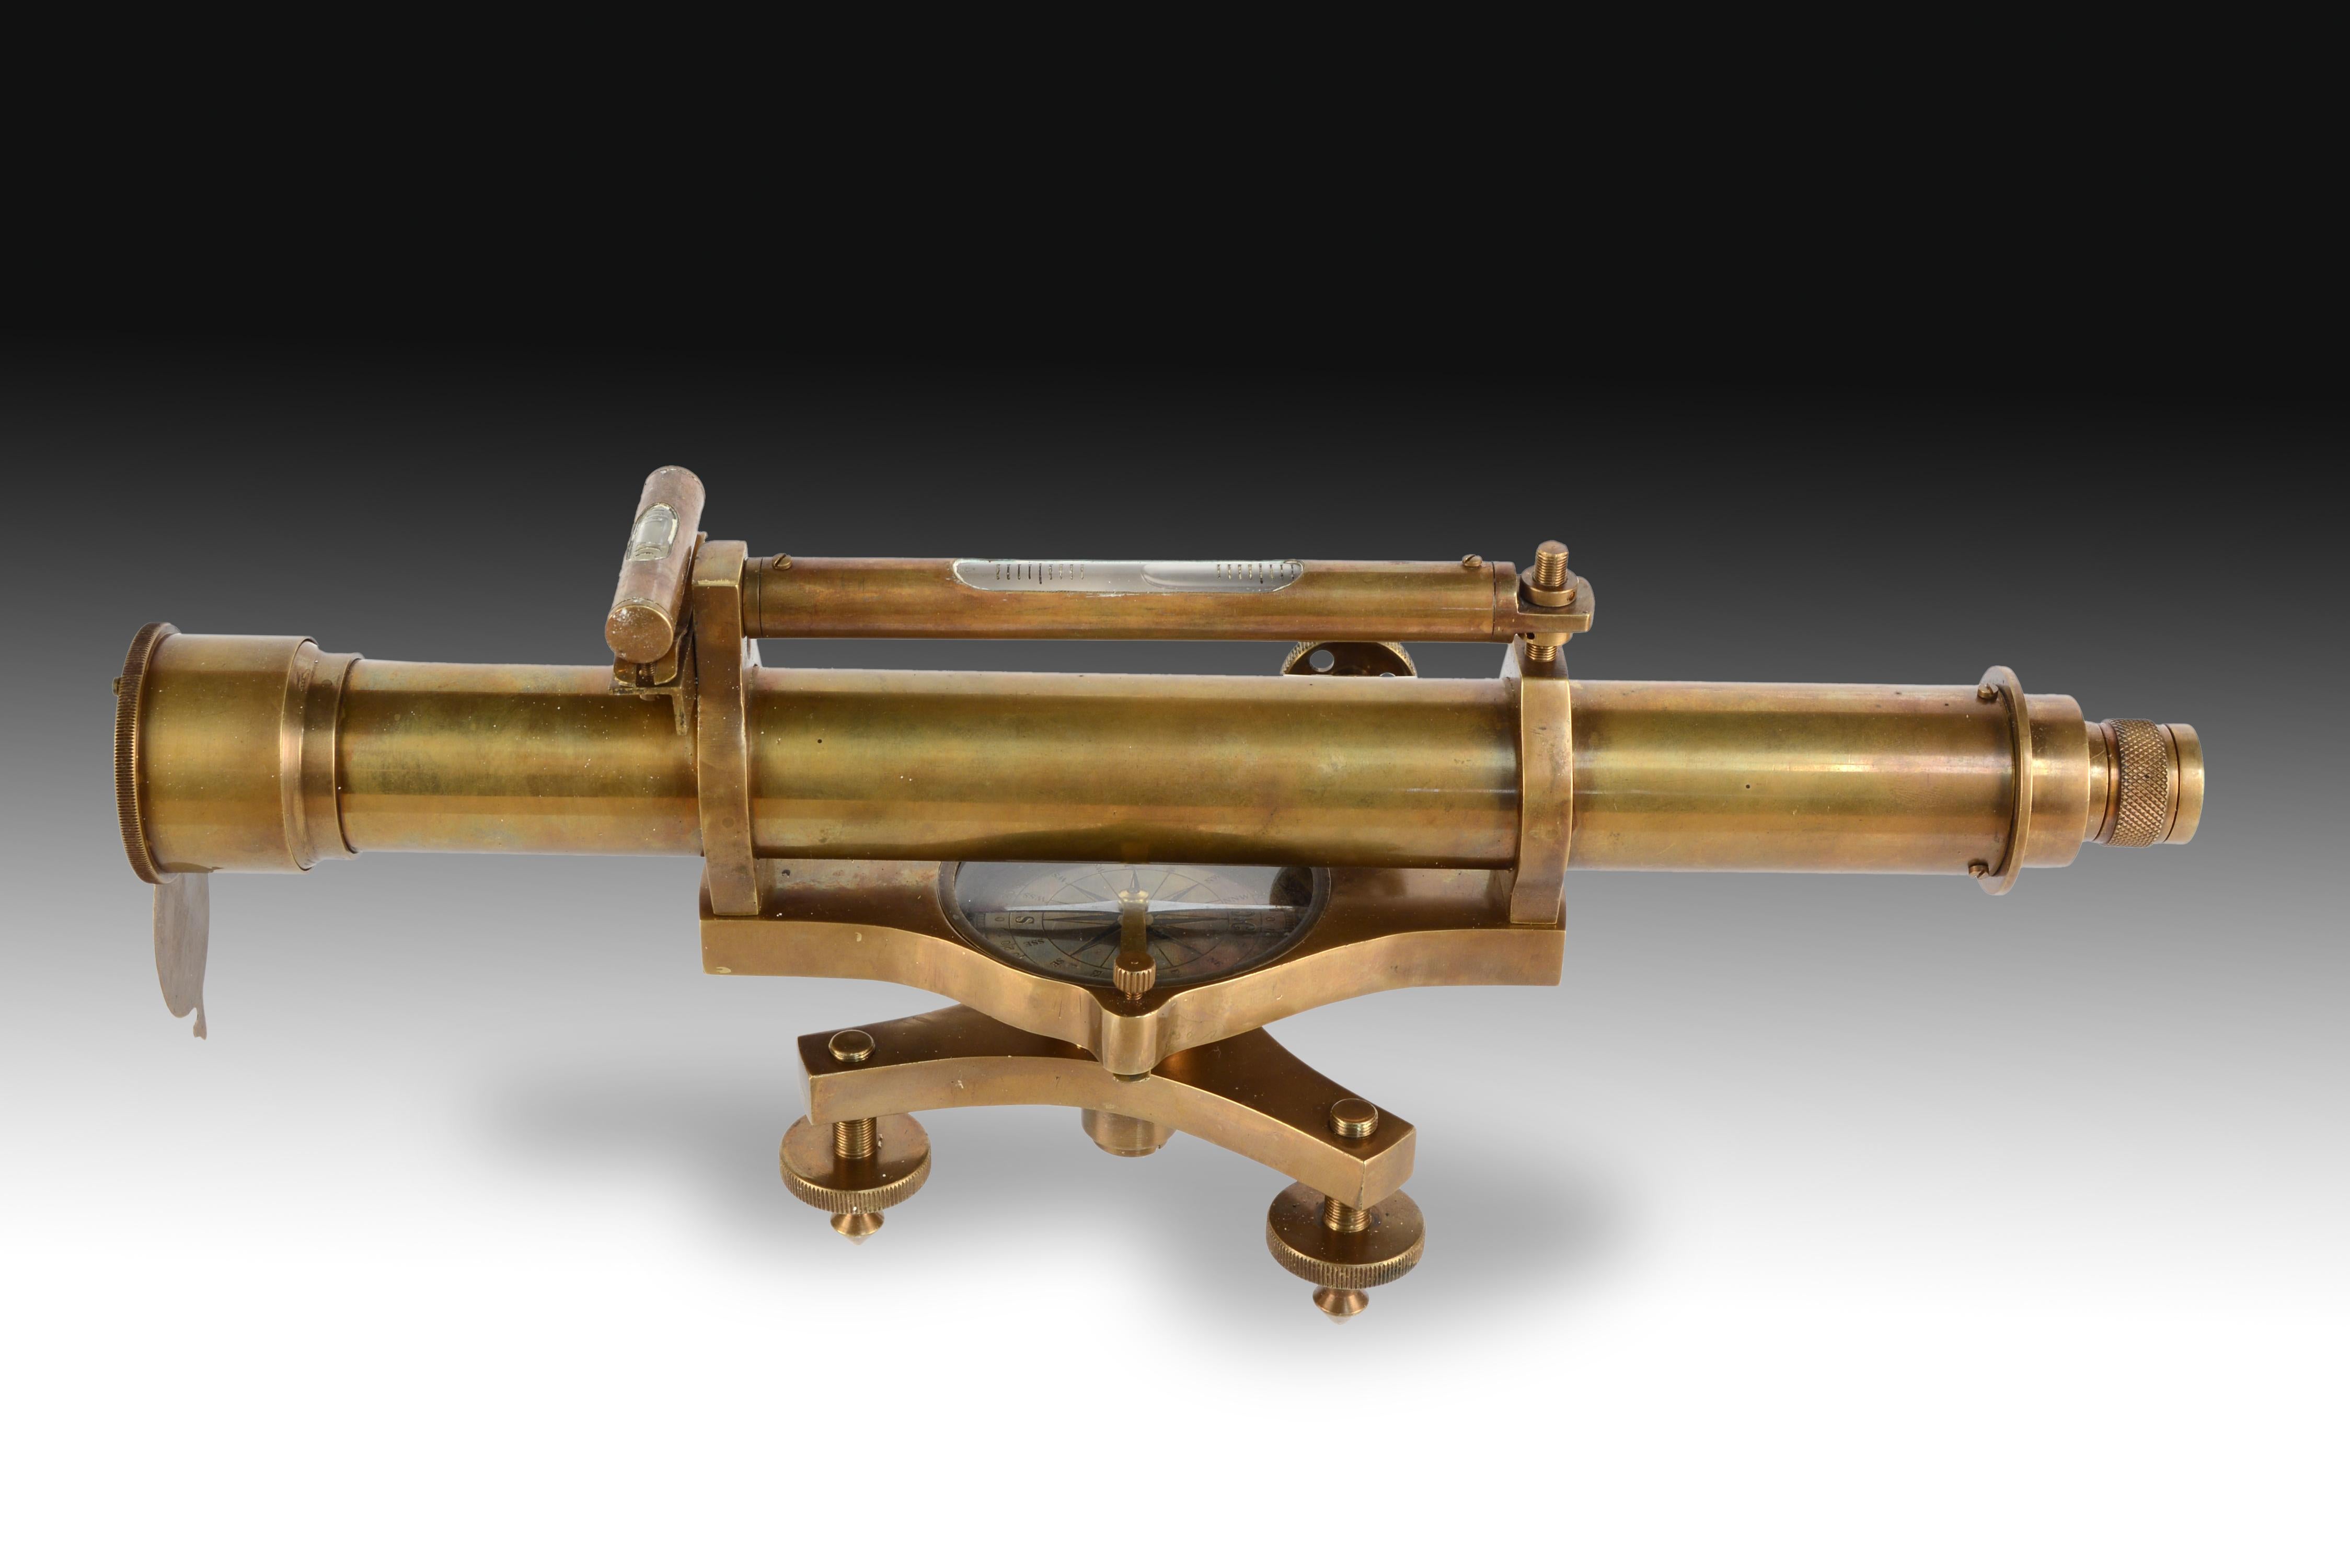 Telescope with decorative level. Metal. 
Small decorative telescope with top level and three adjustable legs that also has a compass and bubble levels.